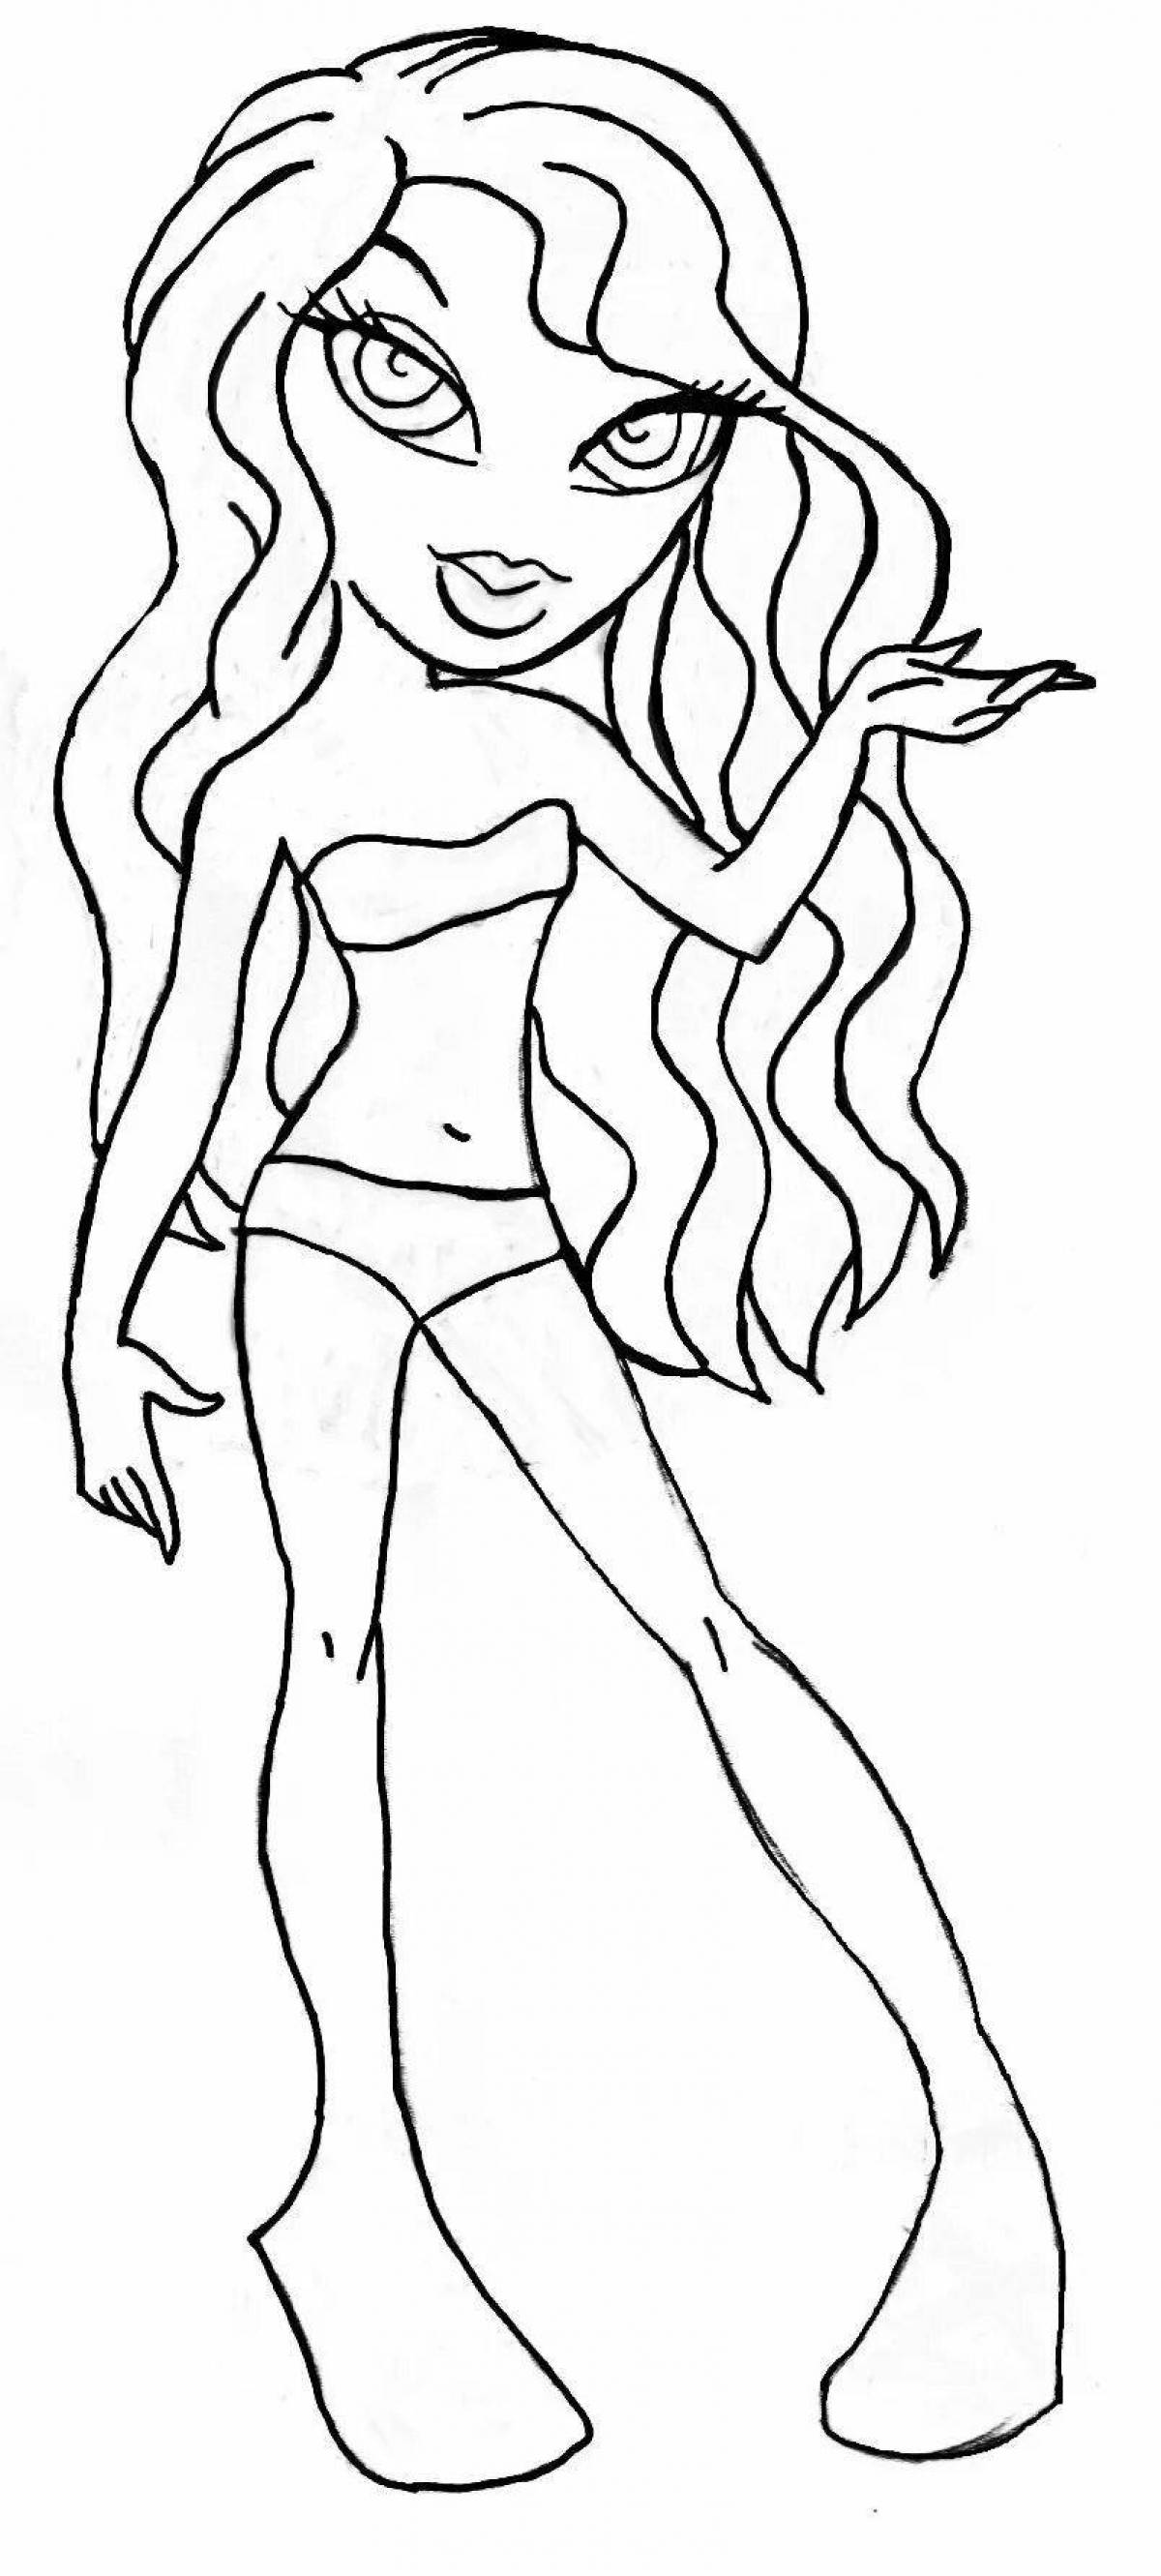 Sparkly doll in swimsuit coloring book